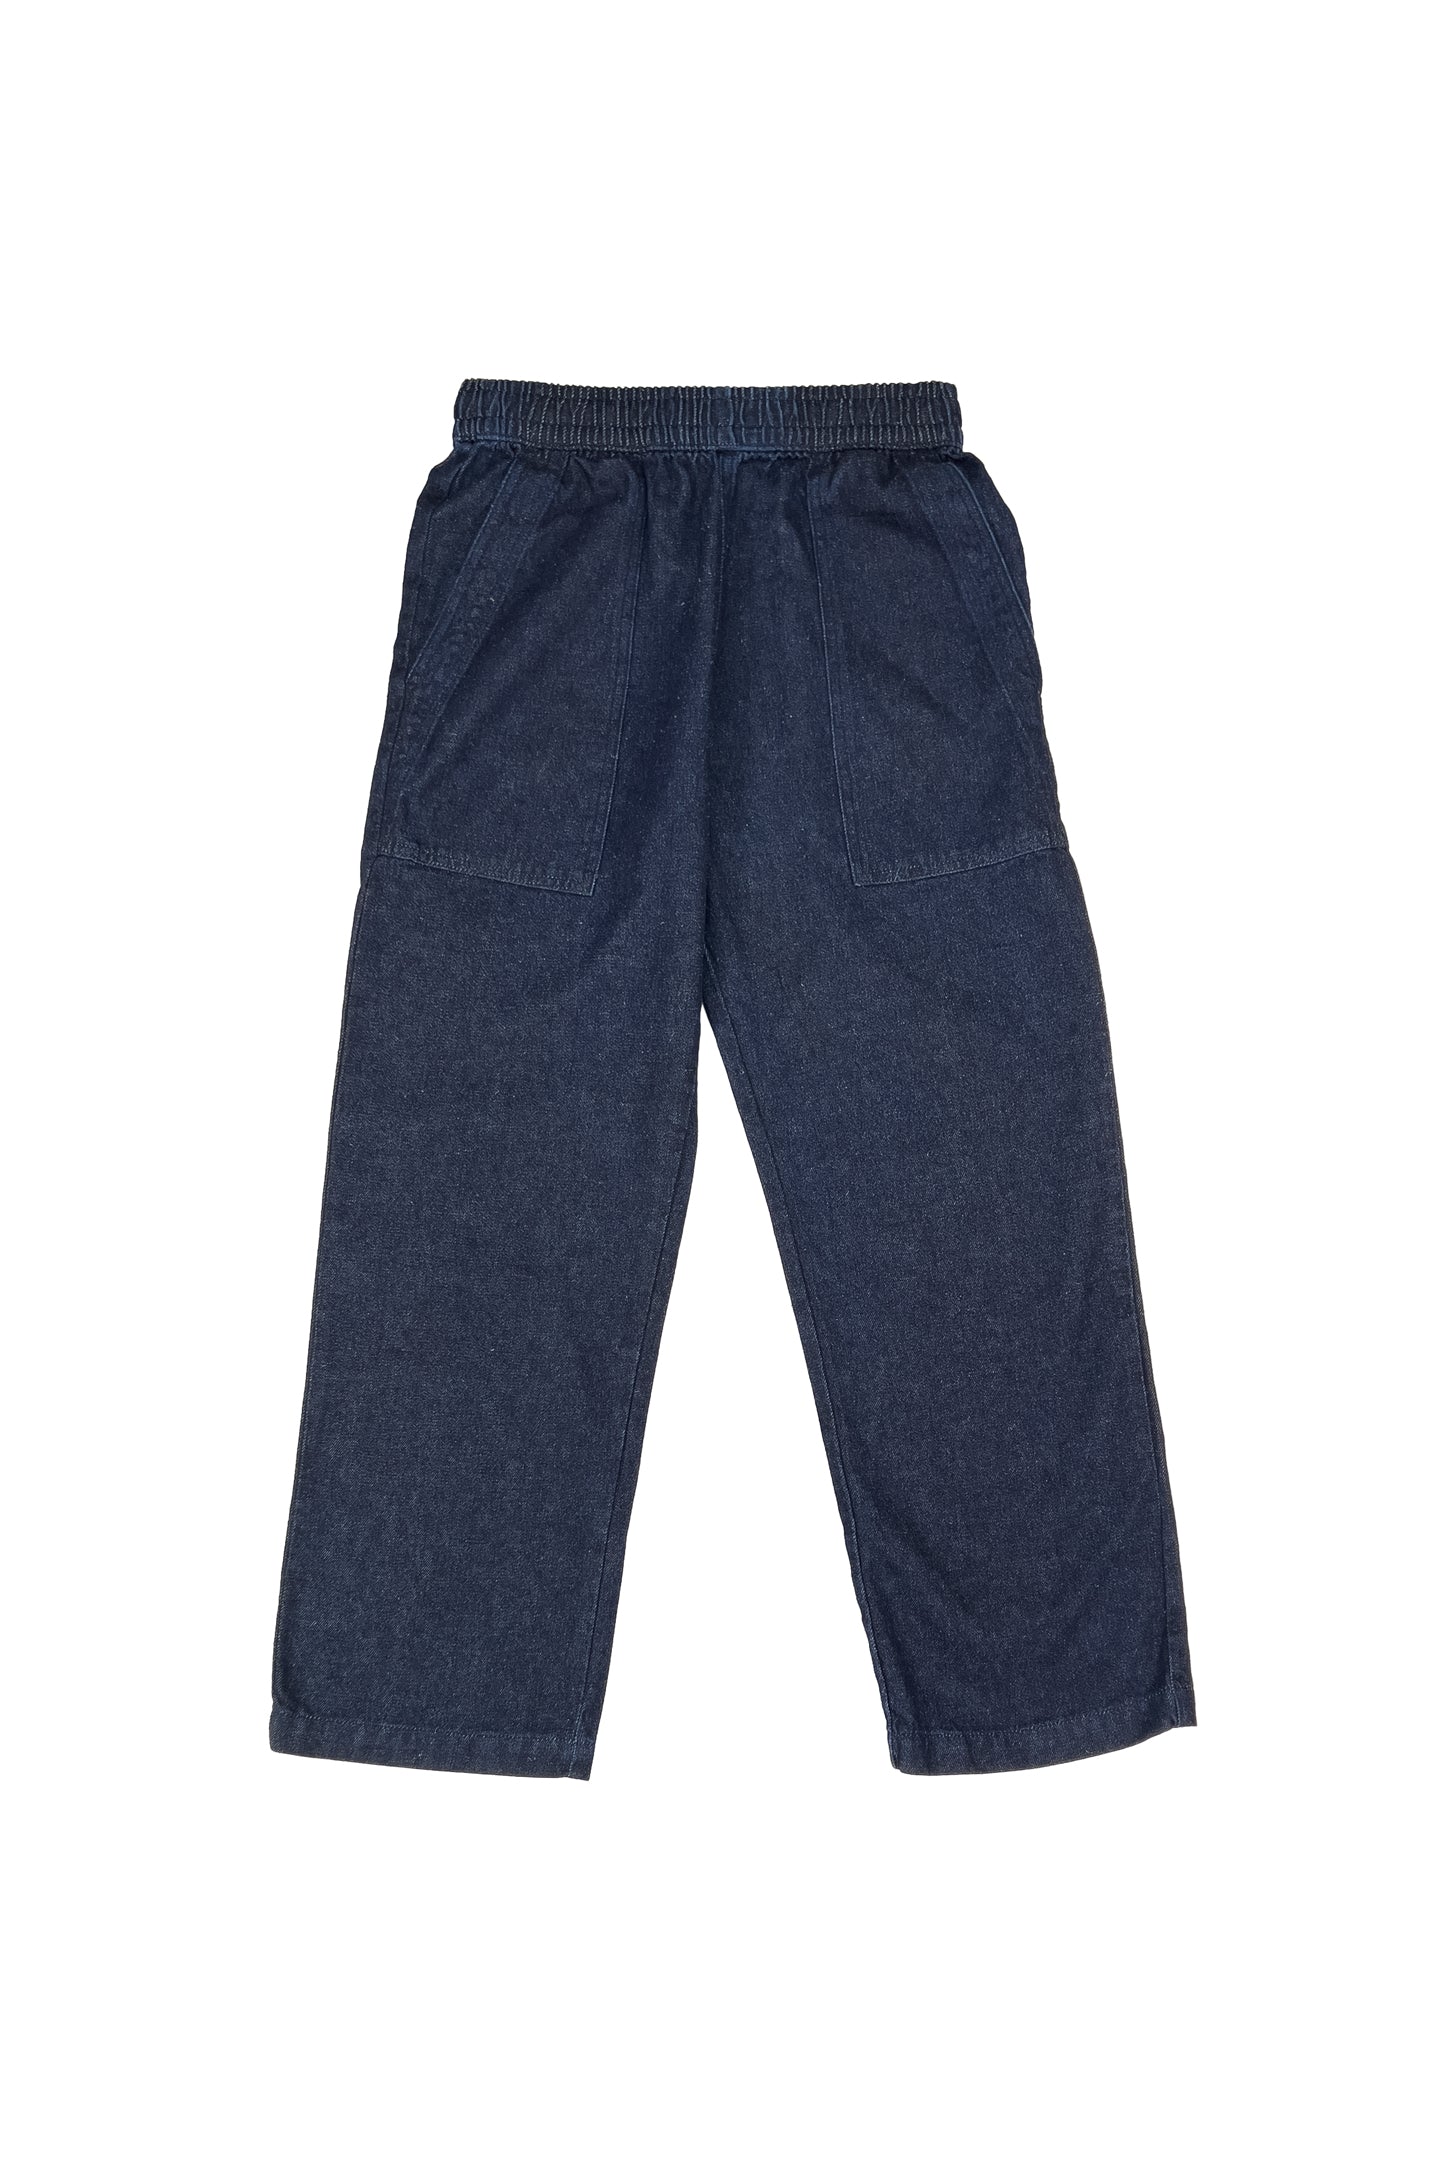 USA made hemp denim pants with high waist creates a flattering shape while the adjustable hidden drawcord and relaxed fit through the hip + thigh makes these a super comfortable wear.